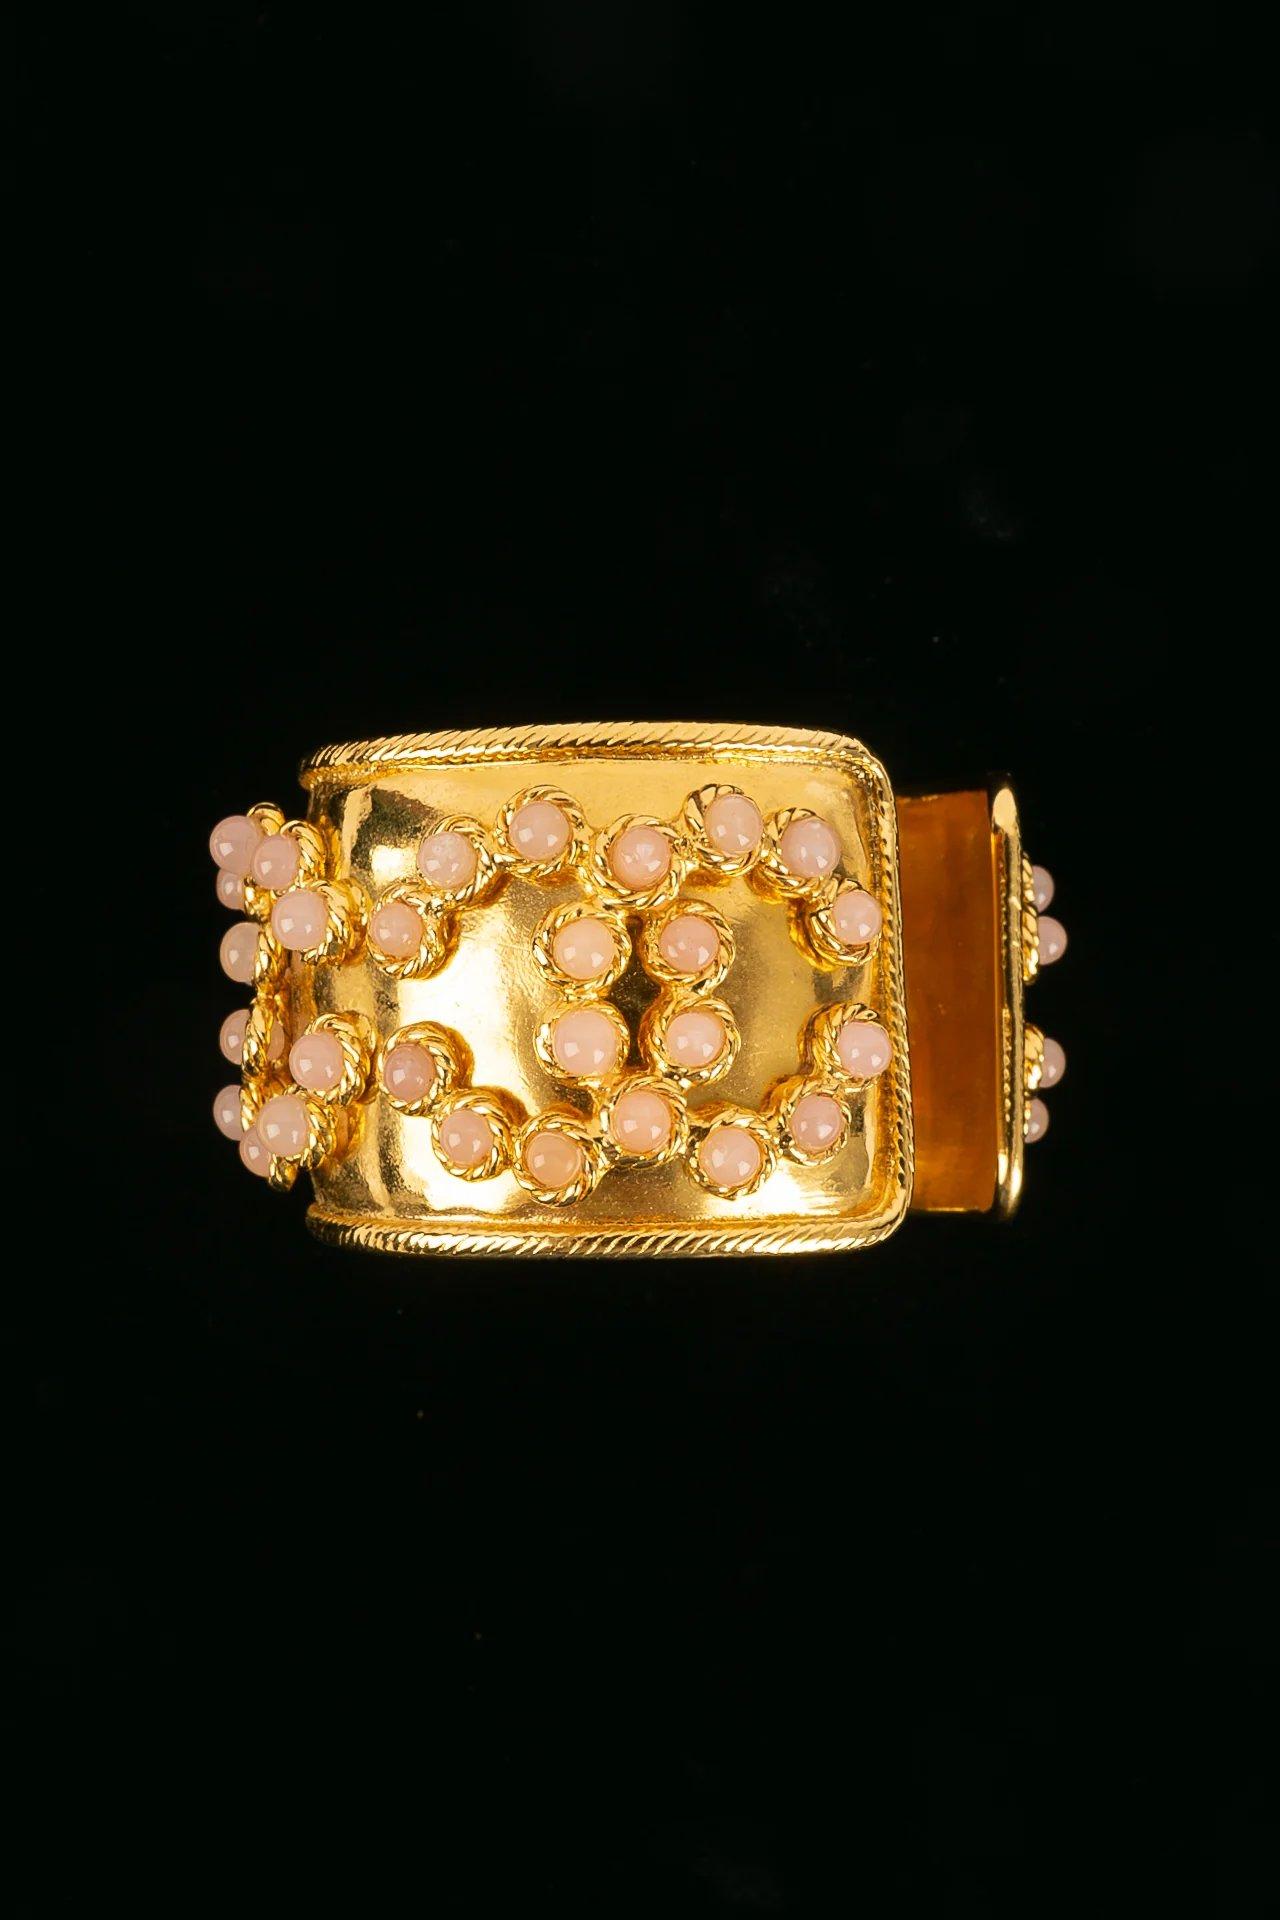 Chanel -(Made in France) Bracelet in gilded metal and cabochons in pale pink glass paste. Collection 2cc3.

Additional information:

Dimensions: Circumference: 18 cm 
Opening: 2.5 cm 
Height: 4 cm

Condition: 
Very good condition
Seller Ref number: